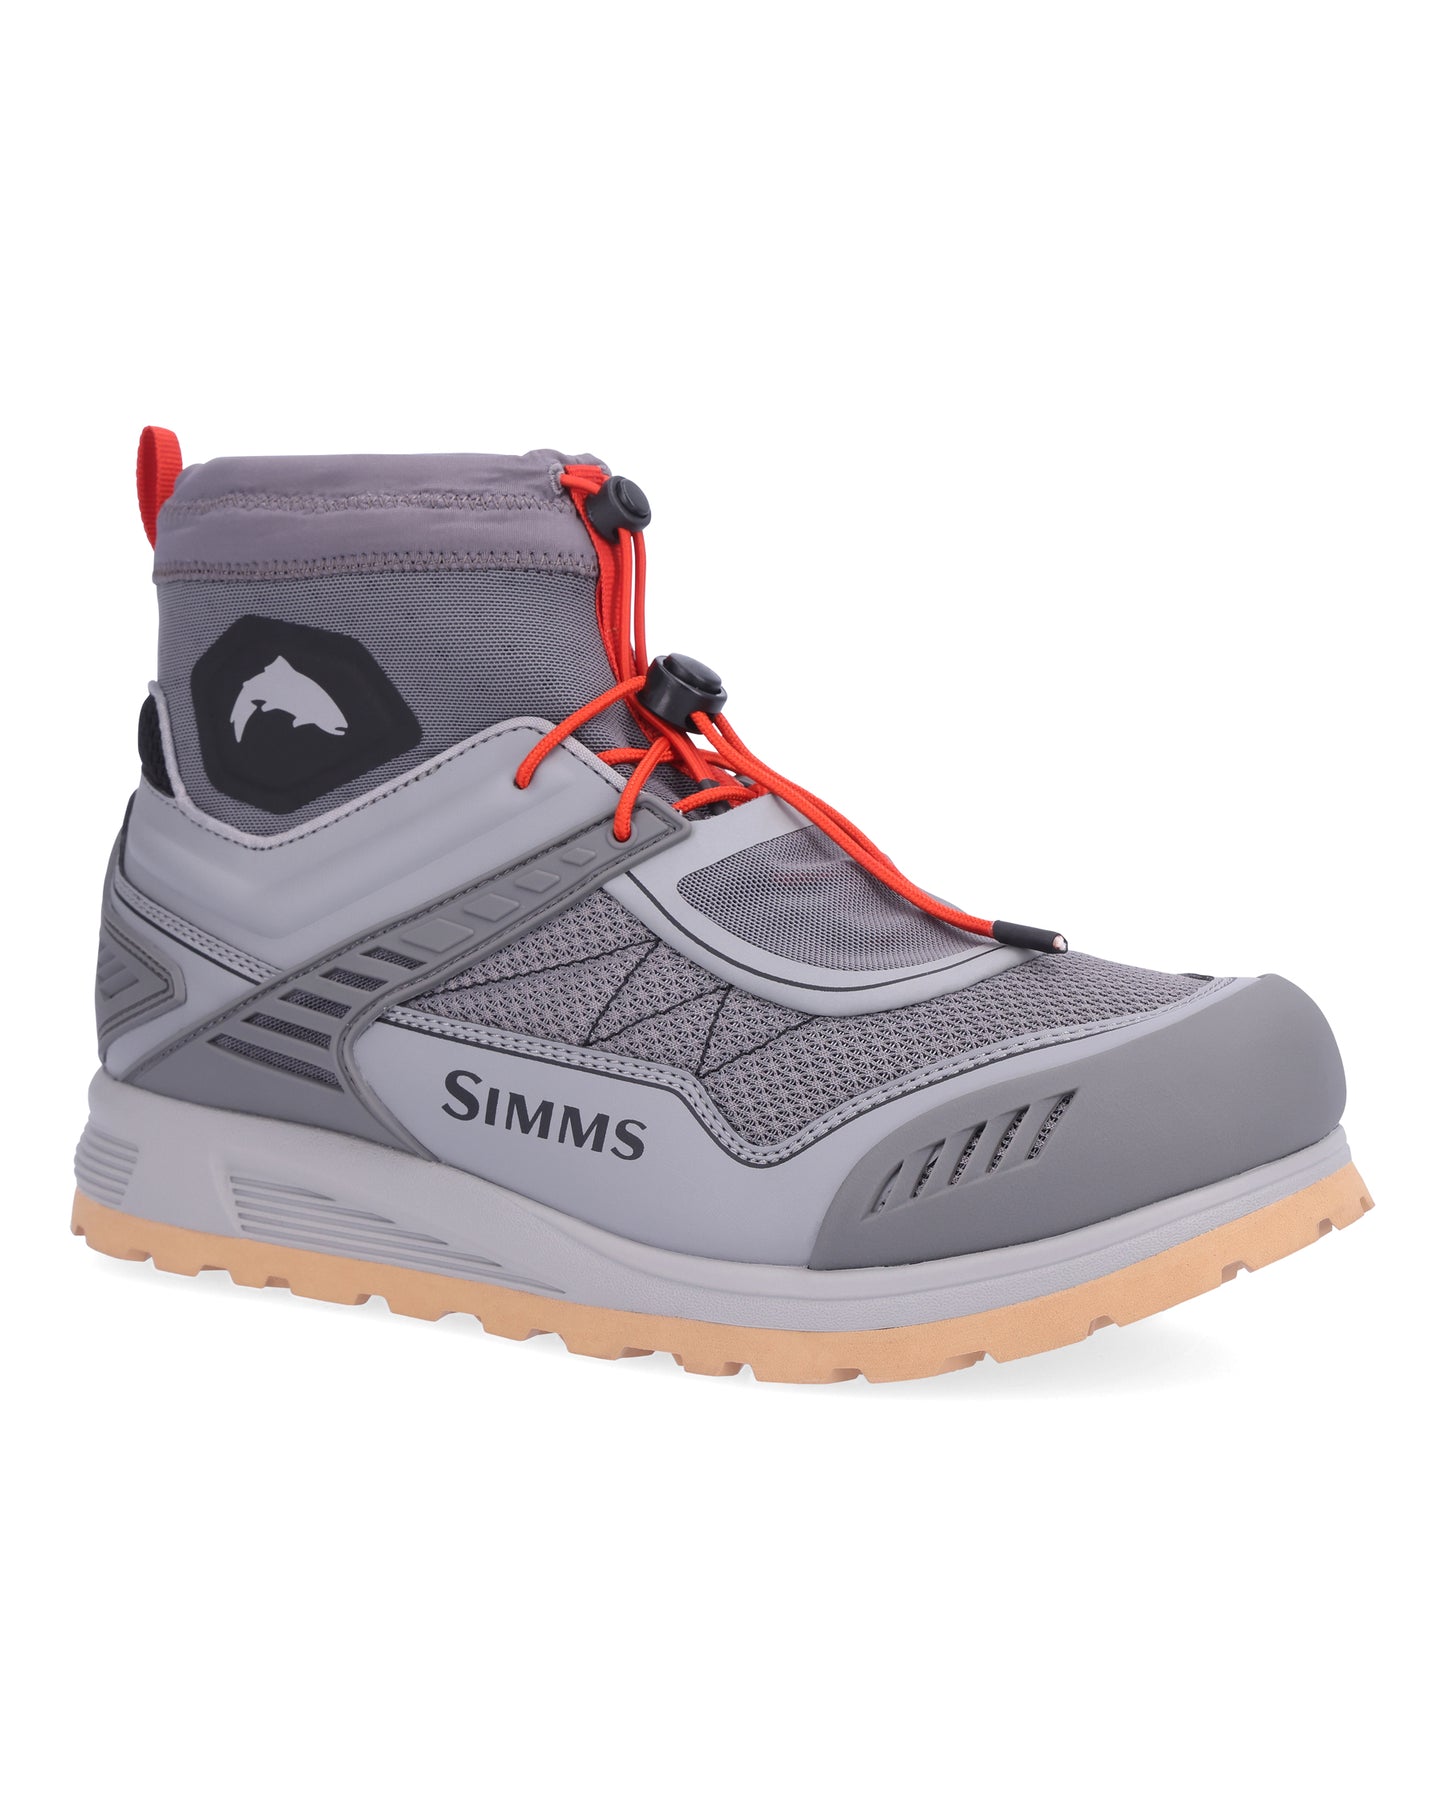     13268-030-flyweight-access-wet-wading-shoe-tabletop